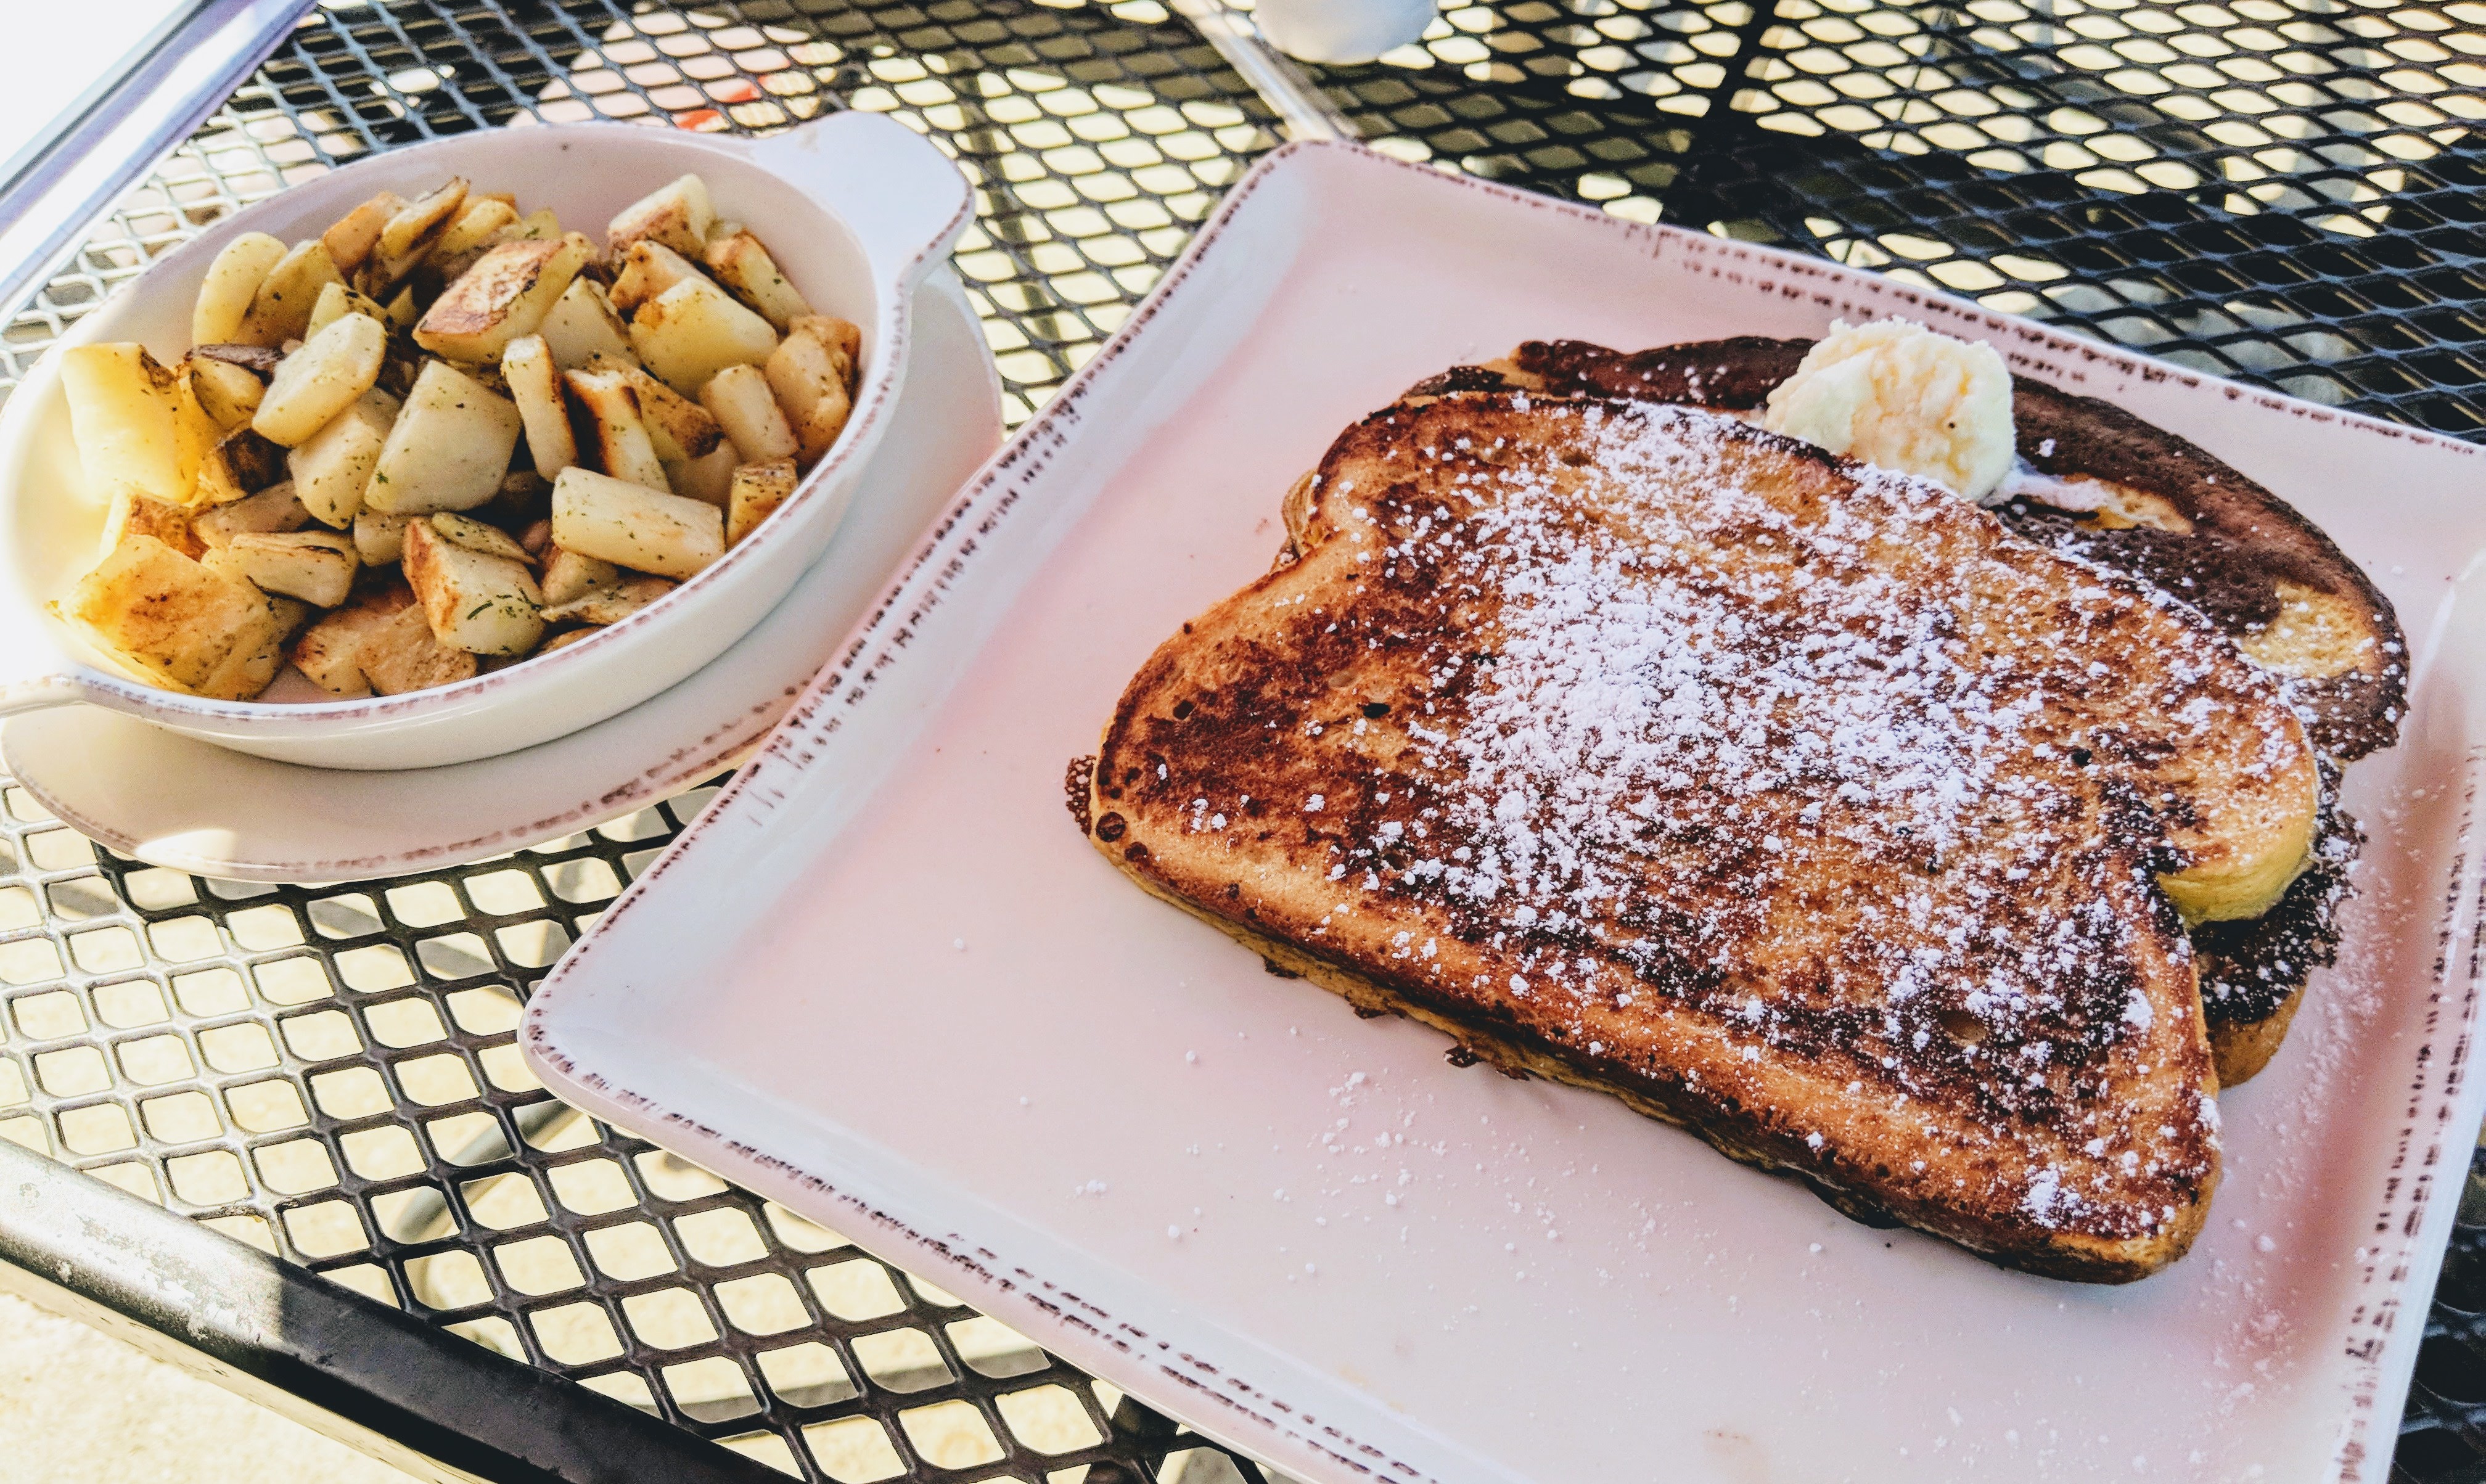 French Toast at The Egg & I